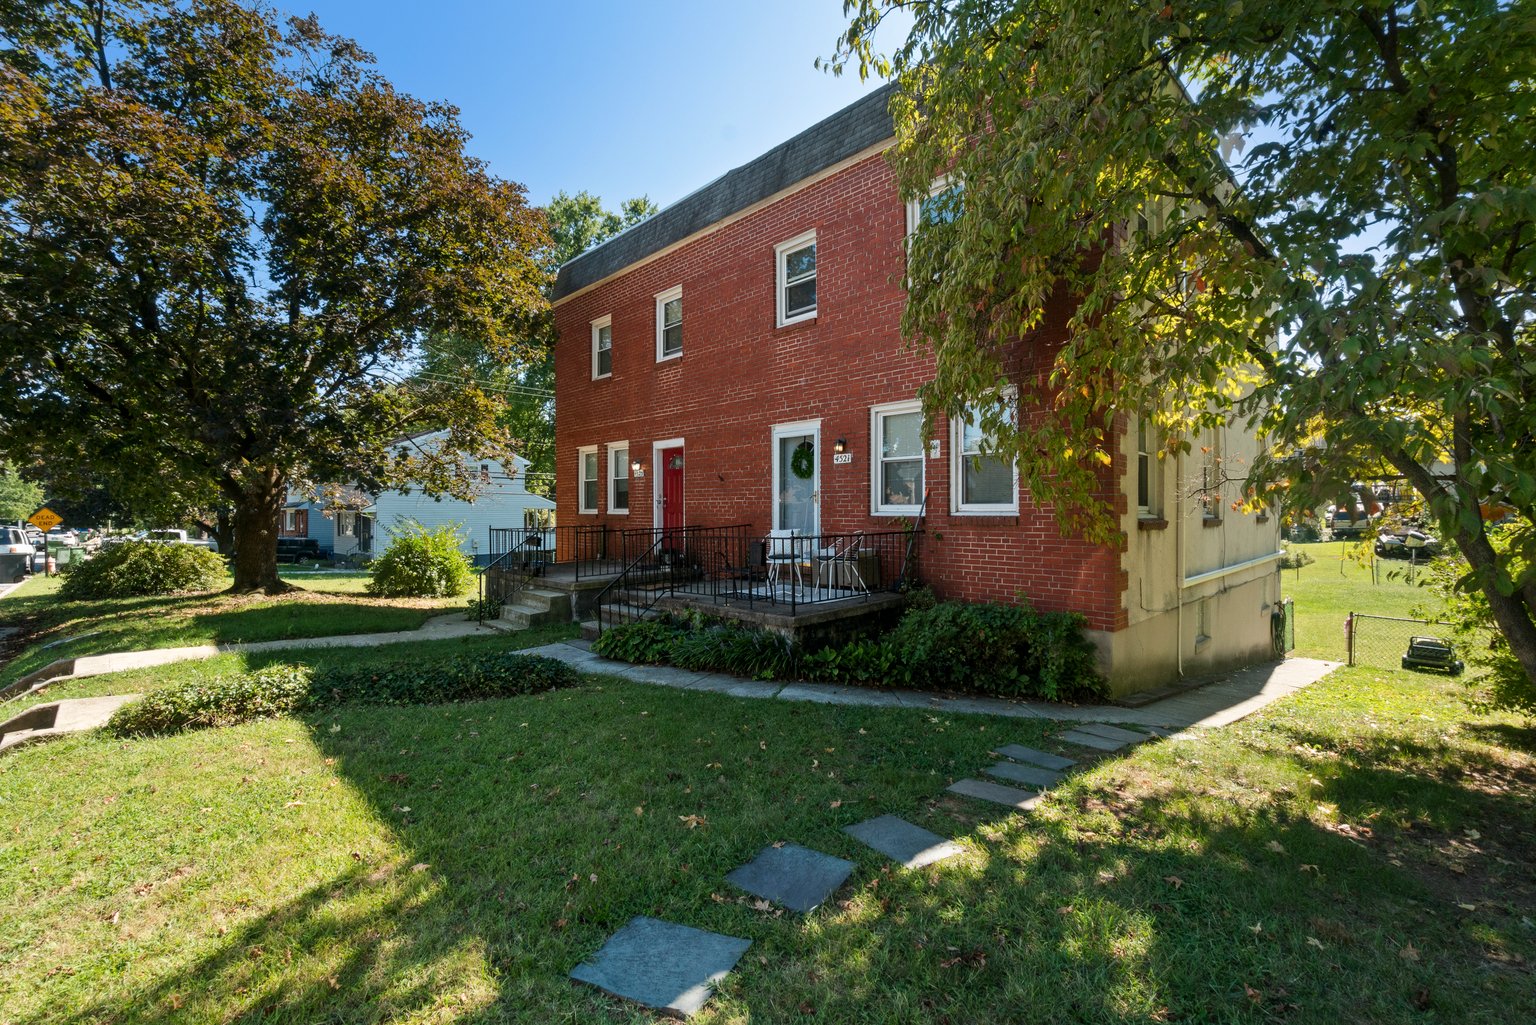 4521 Parkwood Avenue:  2-Unit in Frankford Community